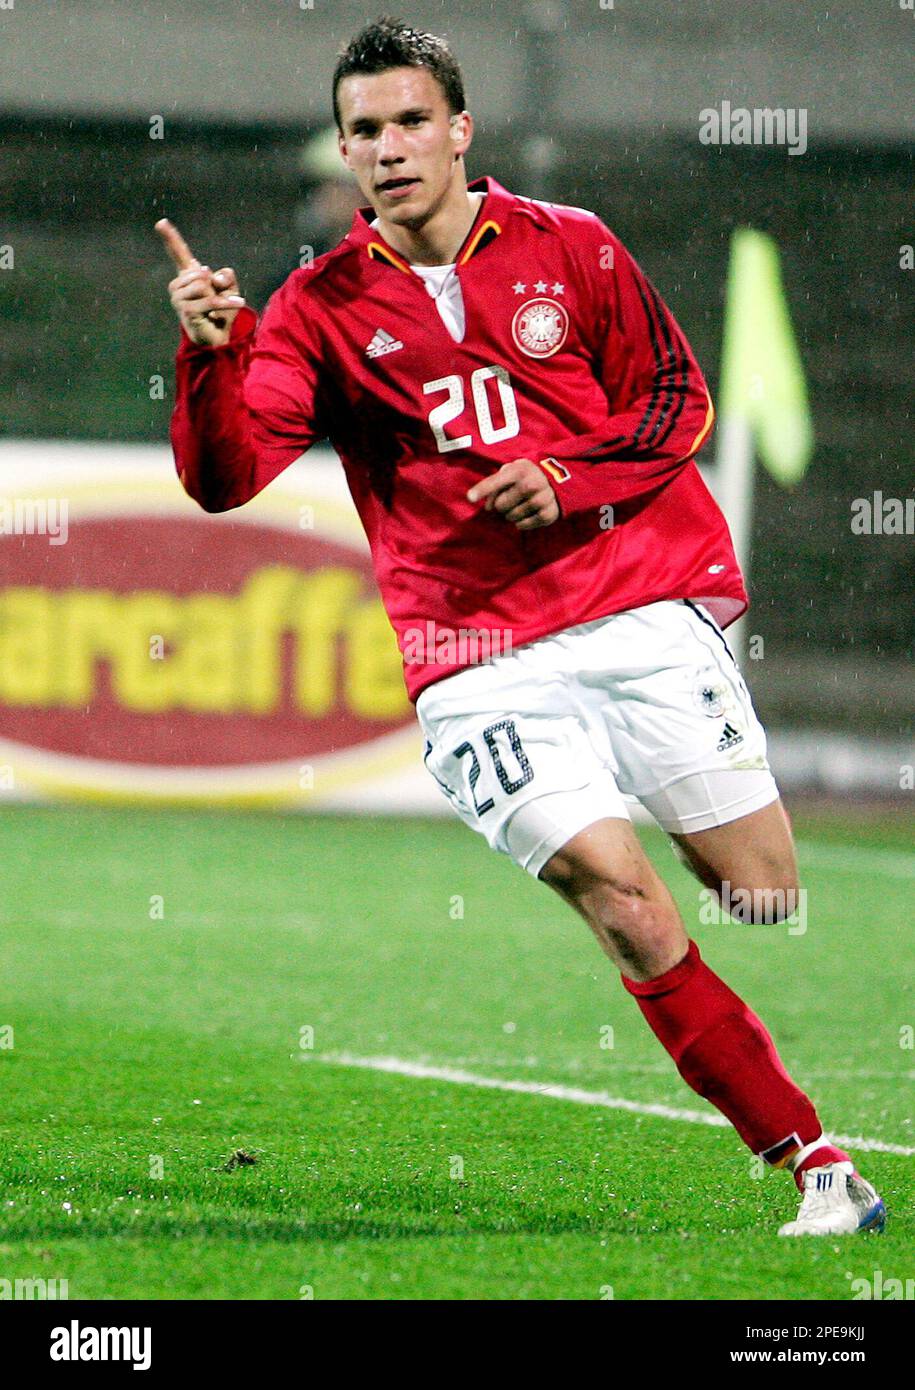 German forward Lukas Podolski celebrates after scoring a goal during a  friendly soccer match between Germany and Slovenia in the " Petrol Arena "  in Celje, Slovenia, on Saturday, March 26, 2005. (